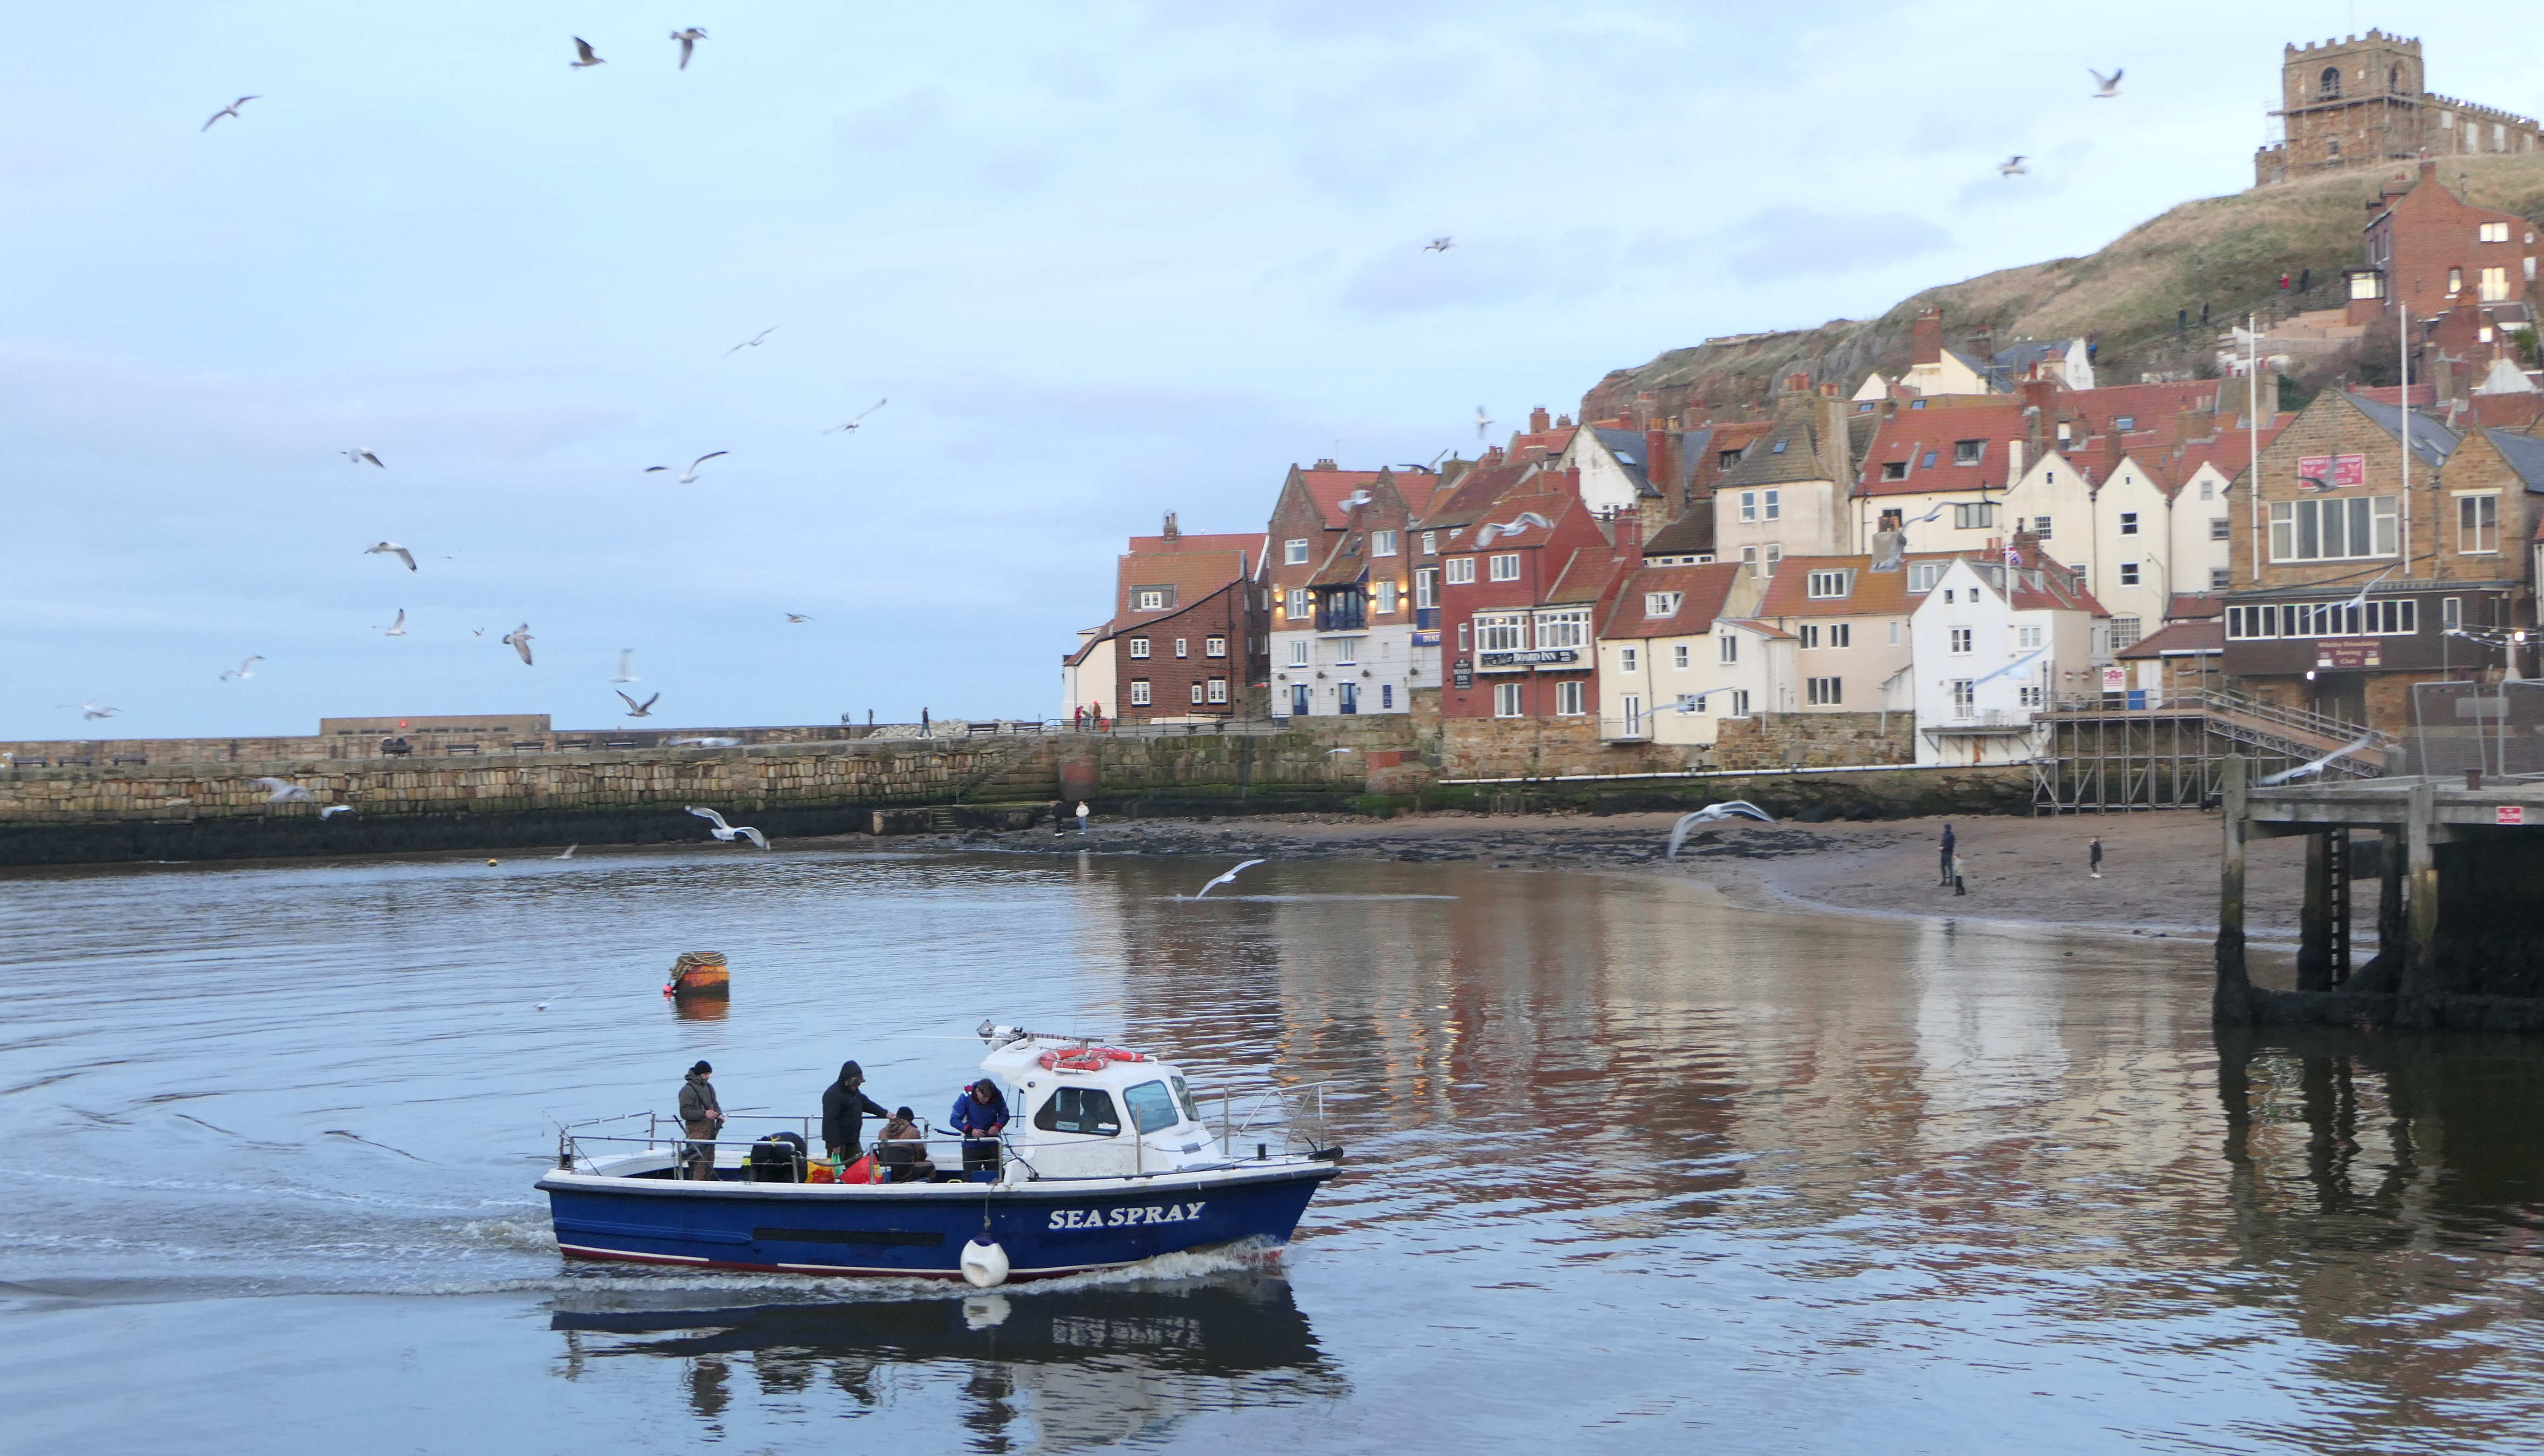 The Seaspray boat is returning to the harbour with the famous abbey at Whitby in the background